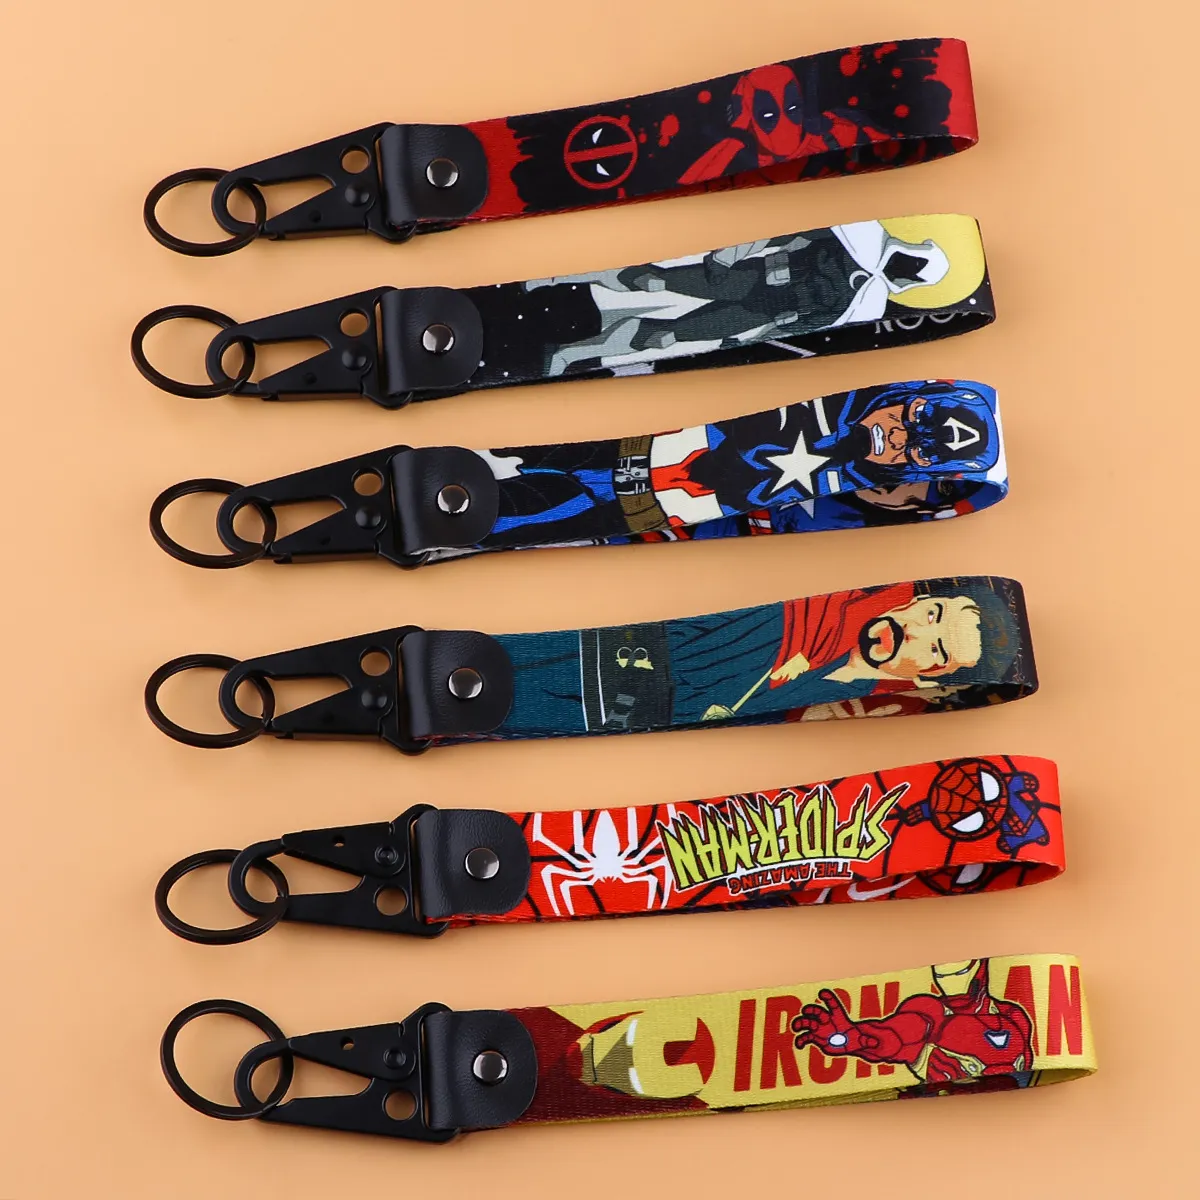 Keychains & Lanyards Various Types Of Cartoon Cool Key Tag Embroidery Fobs For Motorcycles Cars Bag Backpack Keychain Fashion Ring Gi Otfqn